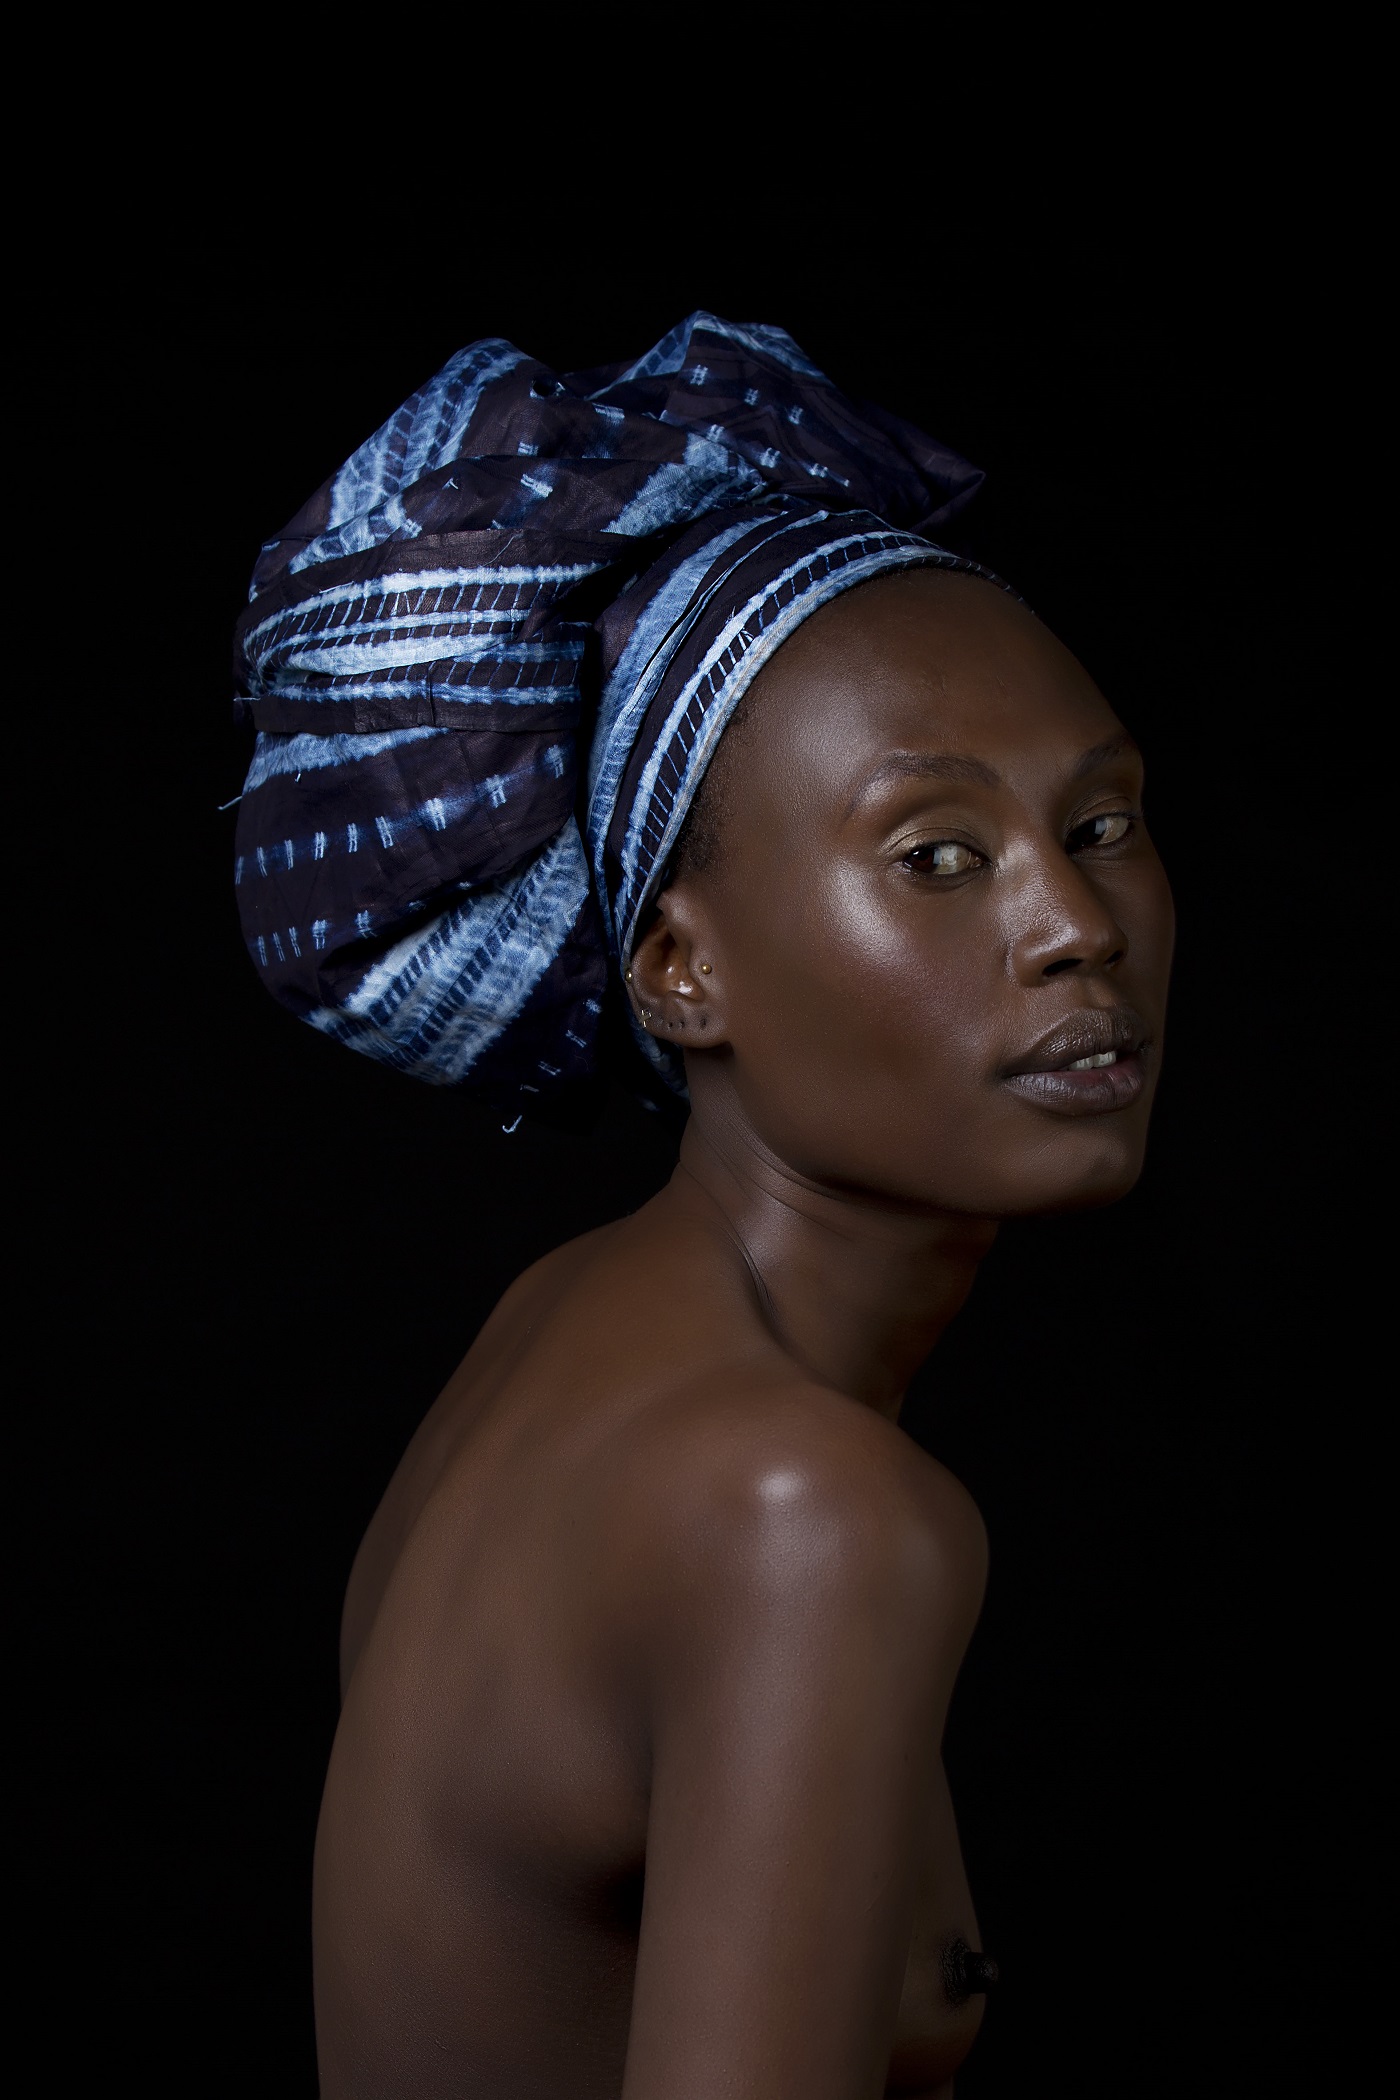 A woman, naked except for a blue turban, in a dark portrait.